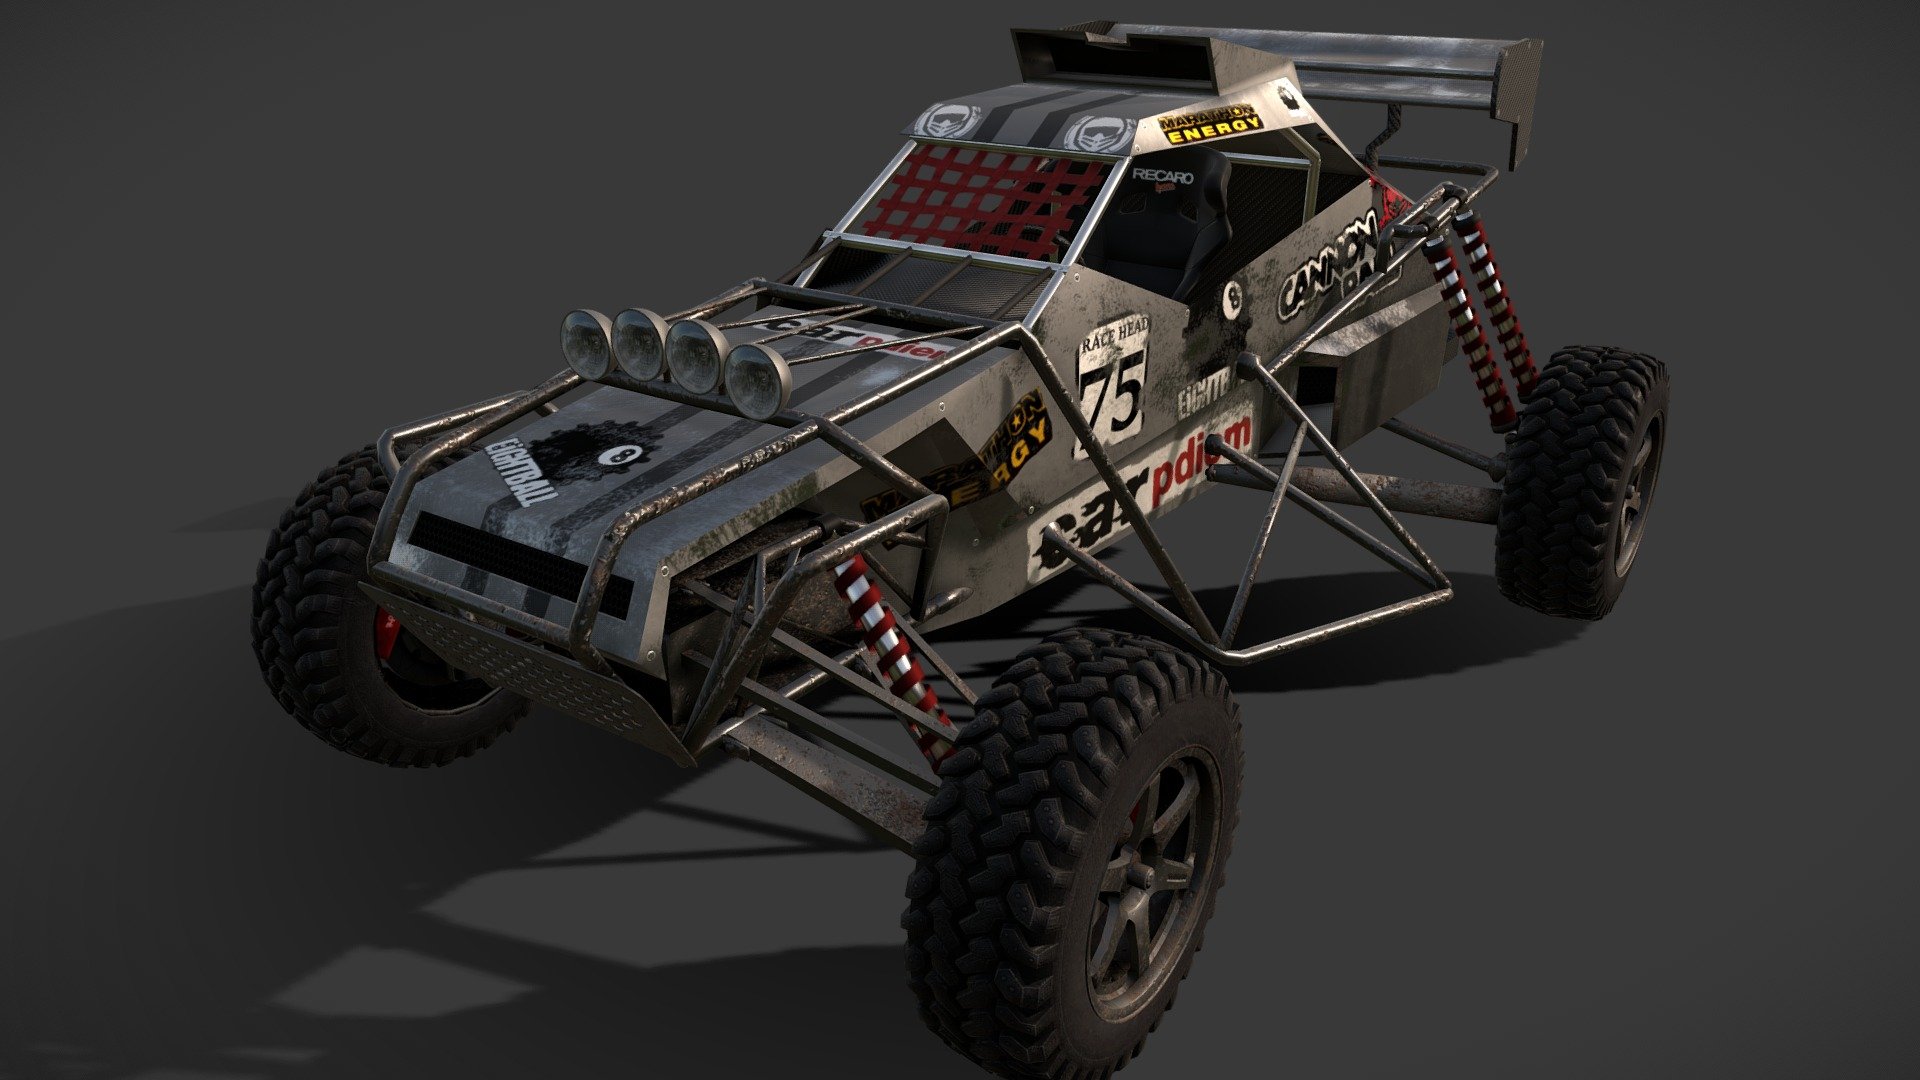 The Jester Butane from Motorstorm Apocalypse.

This Modell features every exterior detail close to the original (Including the fictional brand stickers)

The suspension is kept low poly and is easy to animate.

Note: This model is not rigged! I slighty reworked it from the old one. Mainly textures and some small changes to the mesh. The engine still looks kinda bad maybe ill redo that texture in the Future :P

Textures come in PNG format - Jester Butane Reworked - Download Free 3D model by Swiss_Fox 3d model